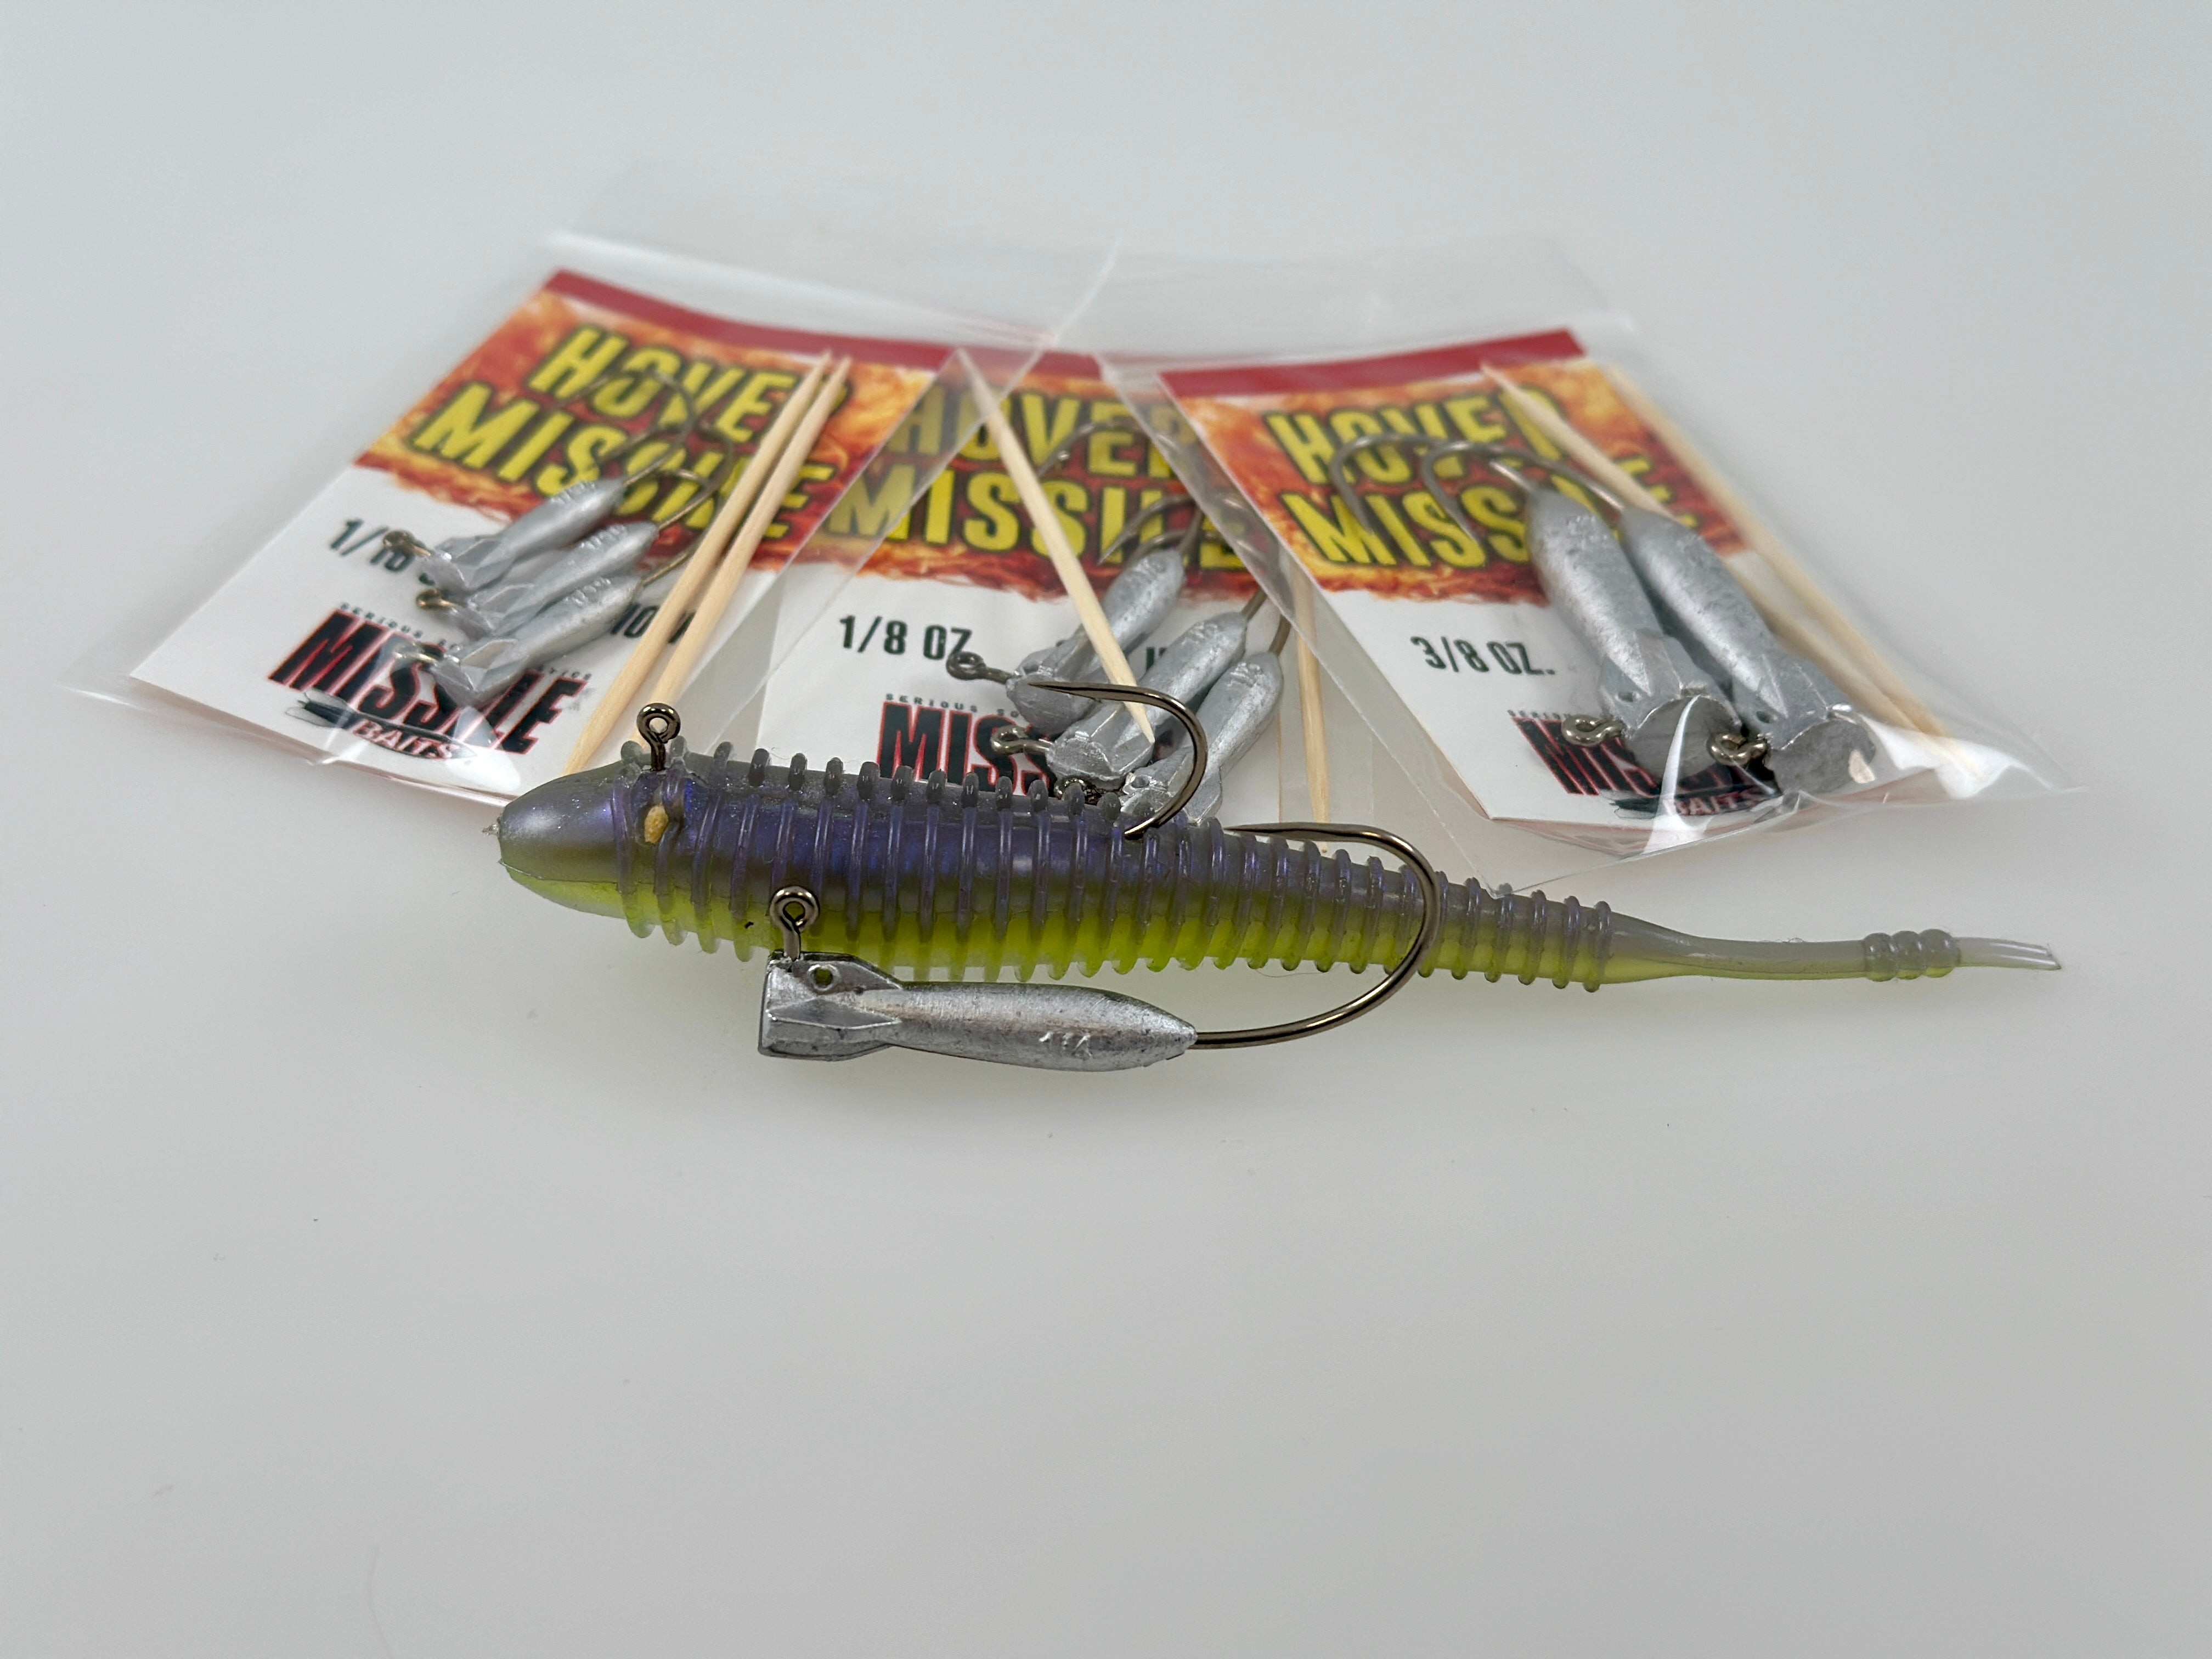 ICAST 2016 Coverage - Missile Baits